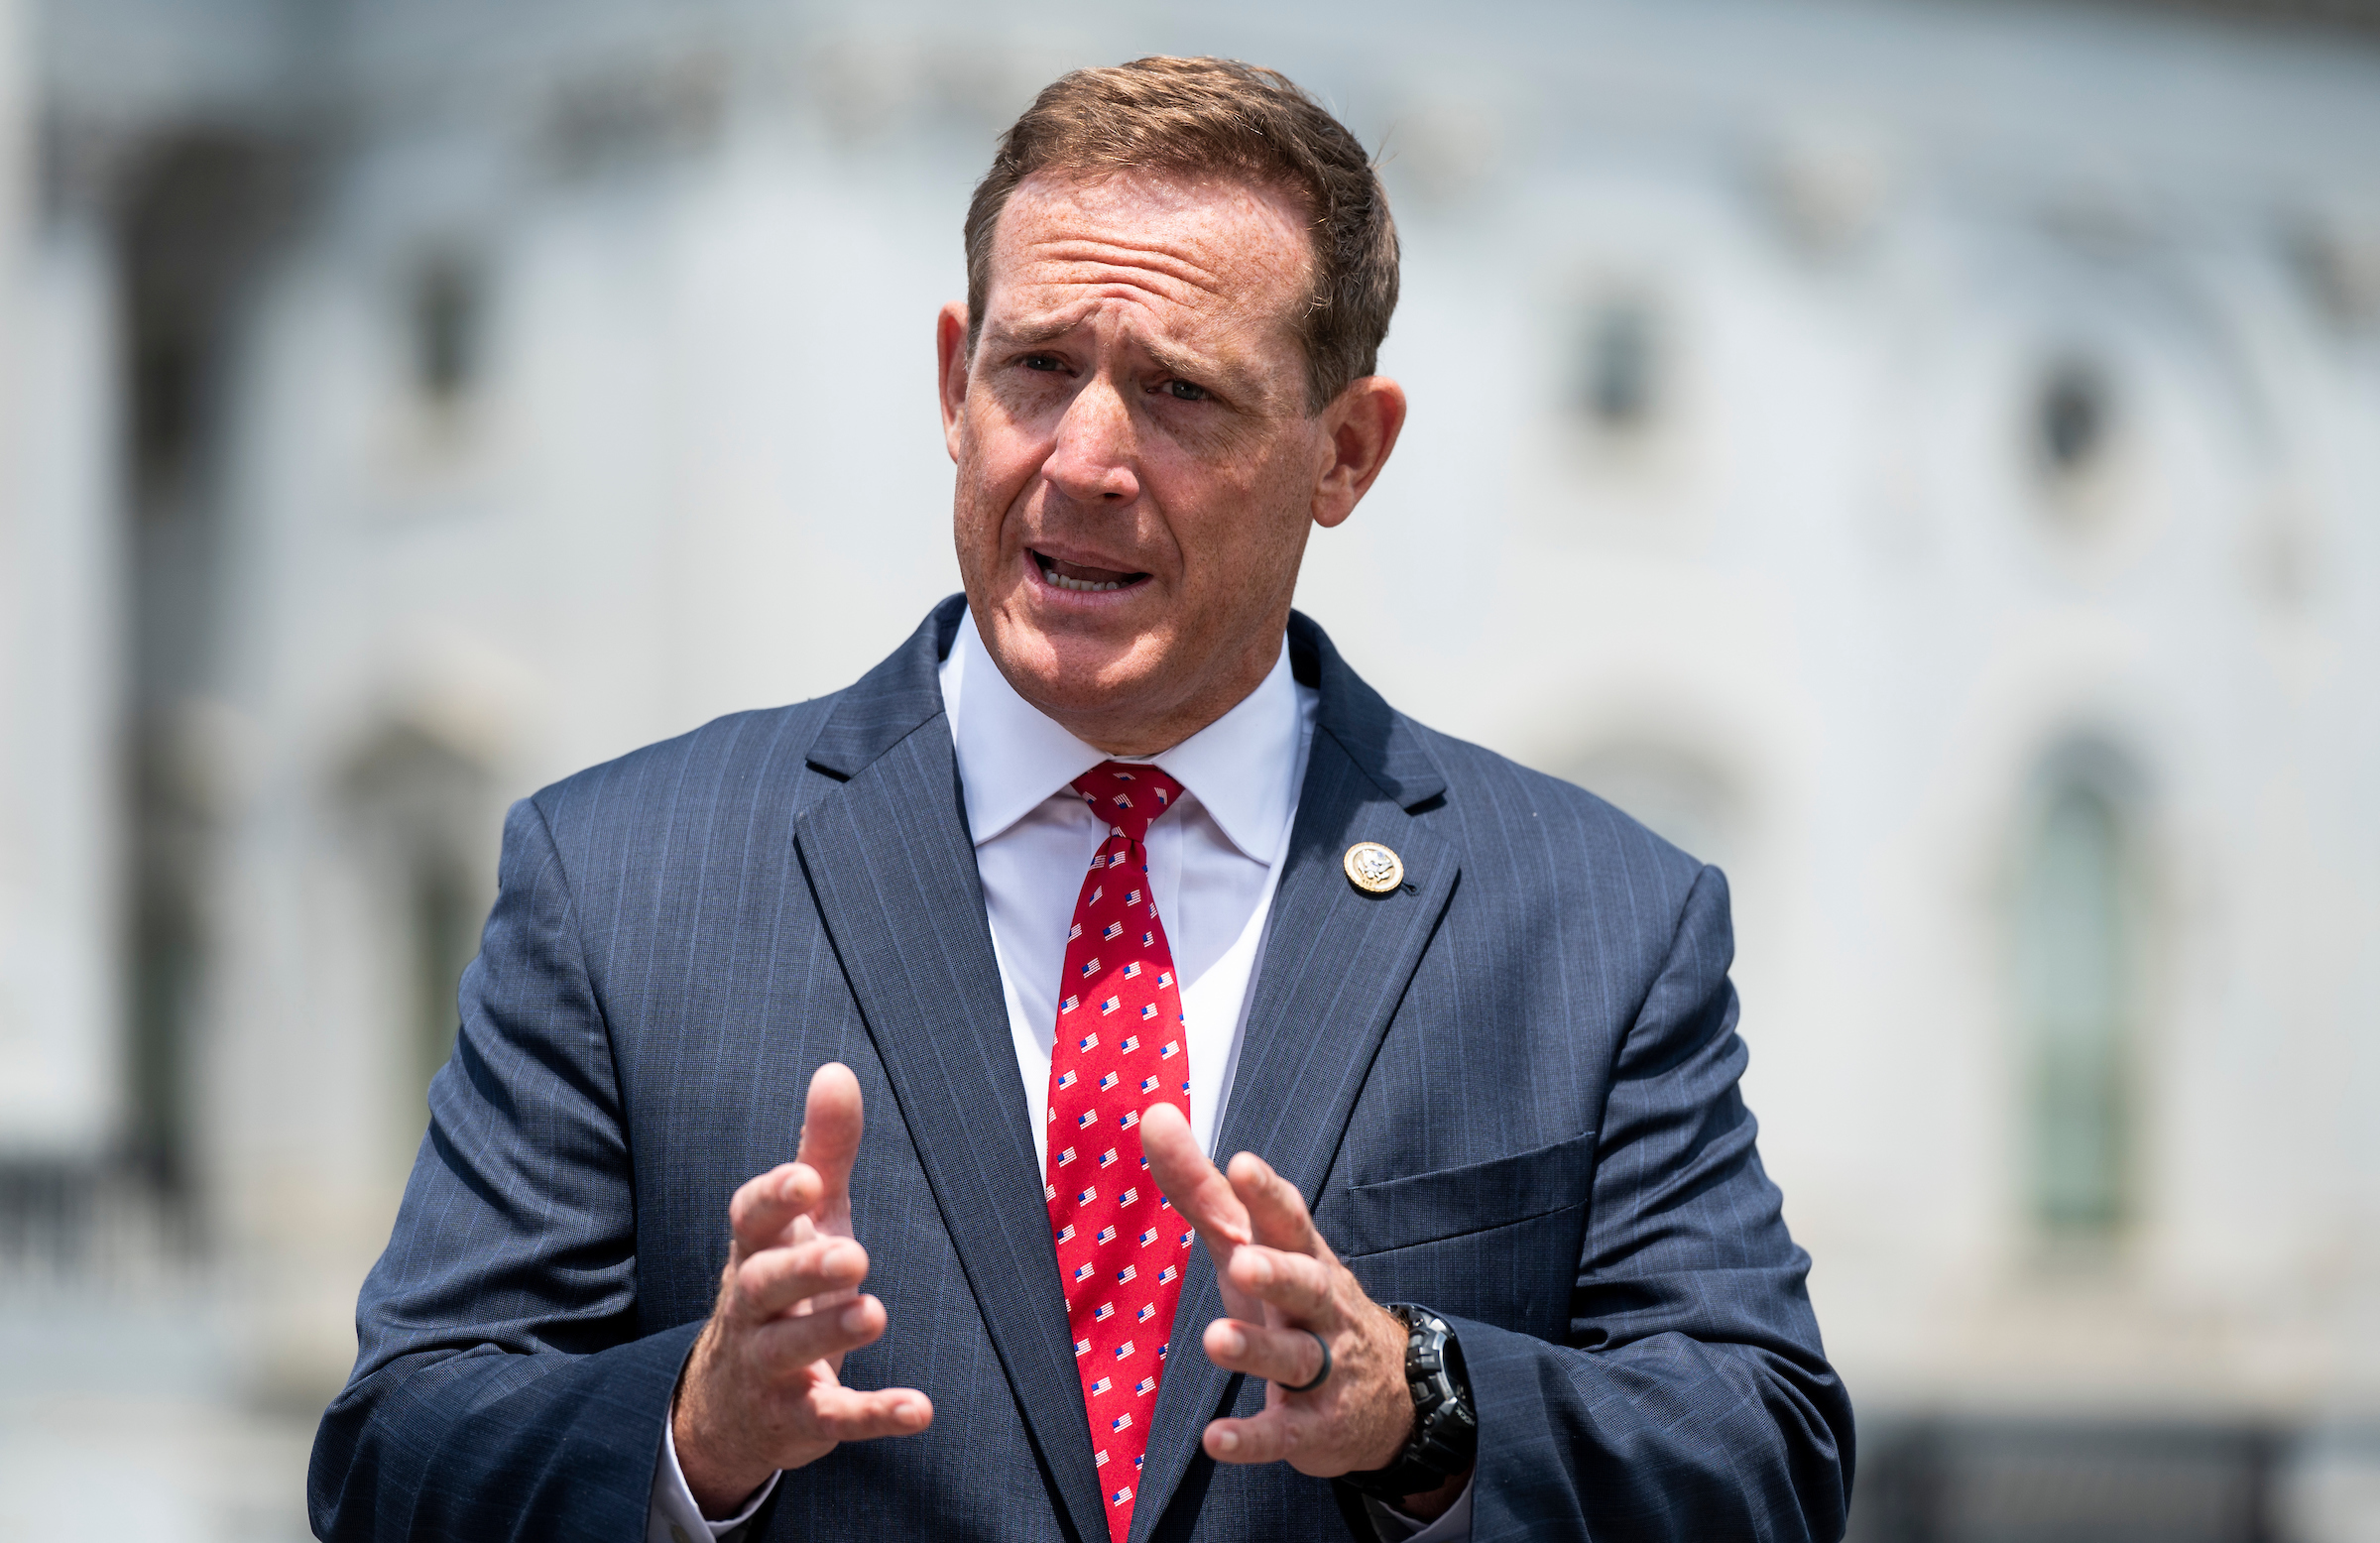 UNITED STATES - JUNE 25: Rep. Ted Budd, R-N.C., does a television news interview outside the Capitol before the vote on the George Floyd Justice in Policing Act of 2020 on Thursday, June 25, 2020. (Photo By Bill Clark/CQ Roll Call)